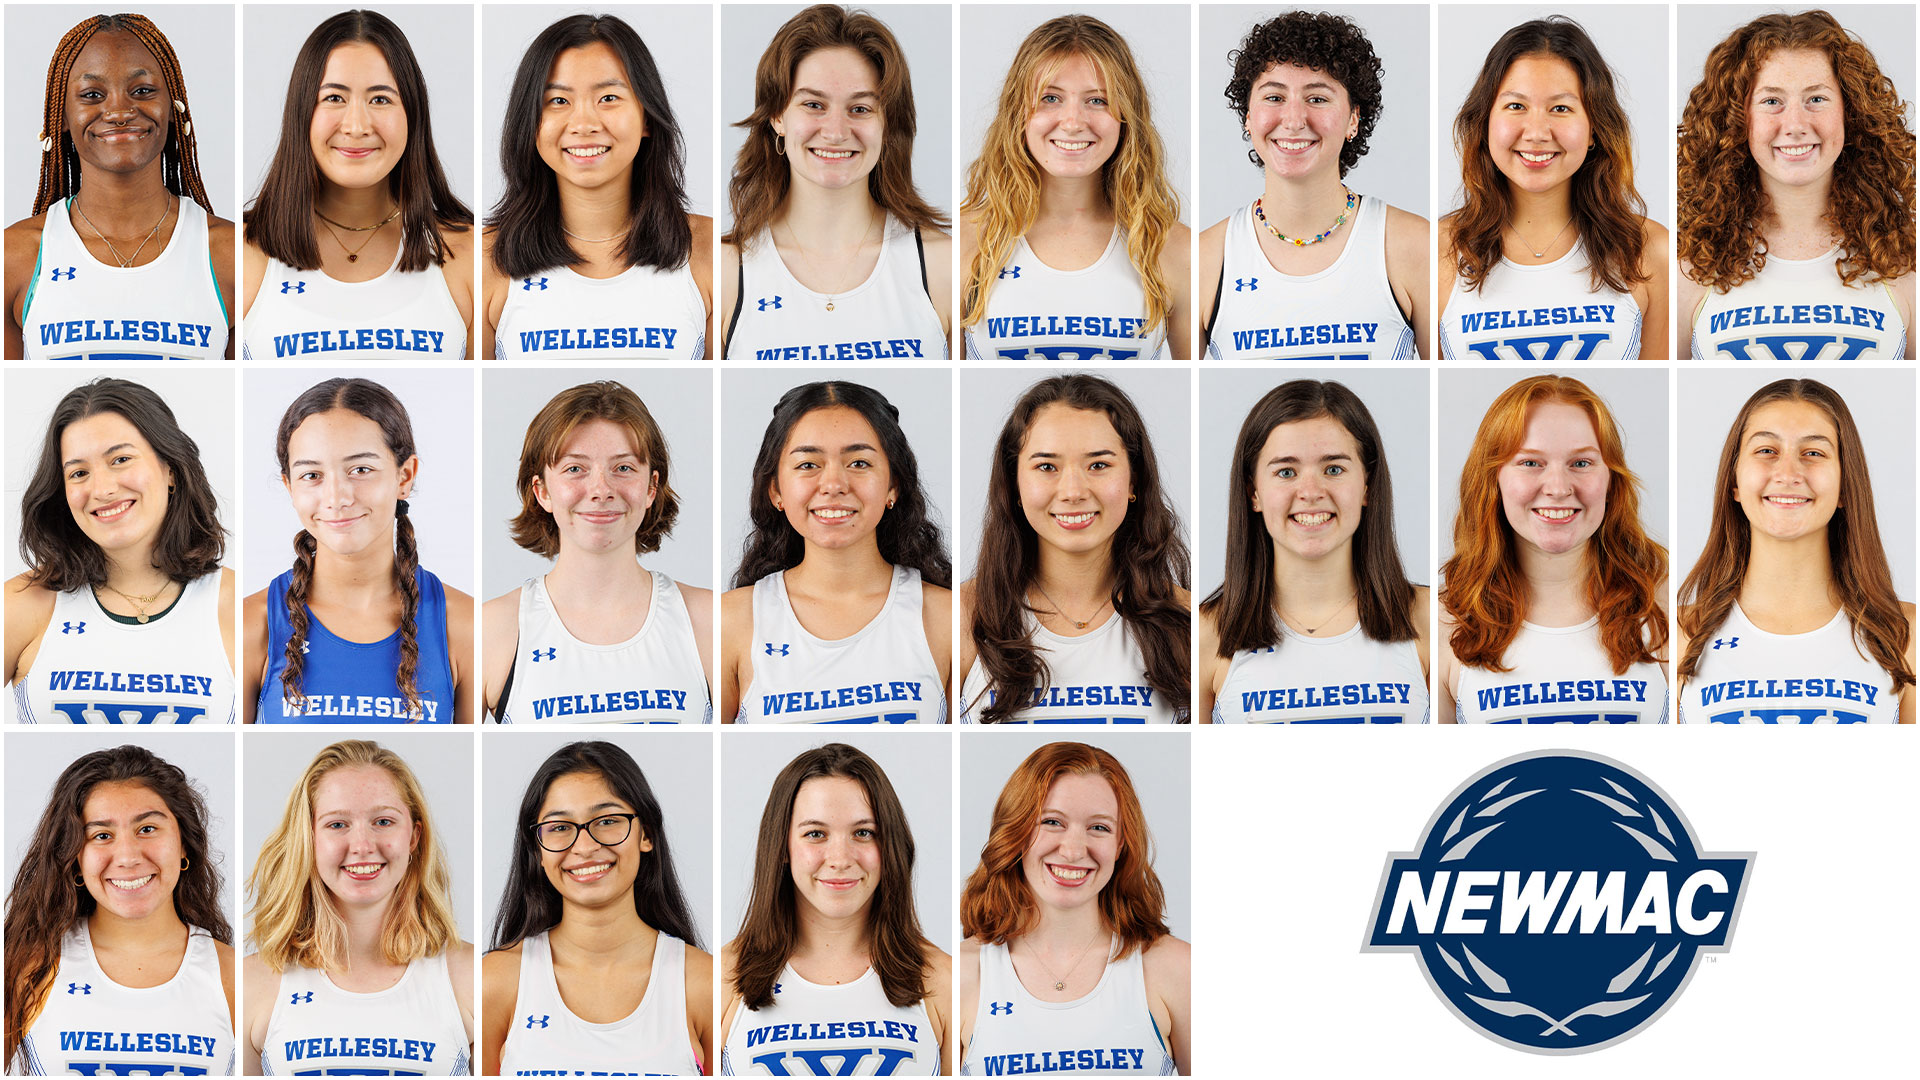 21 members of Wellesley track & field have been named to the Academic All-Conference Team (Frank Poulin)